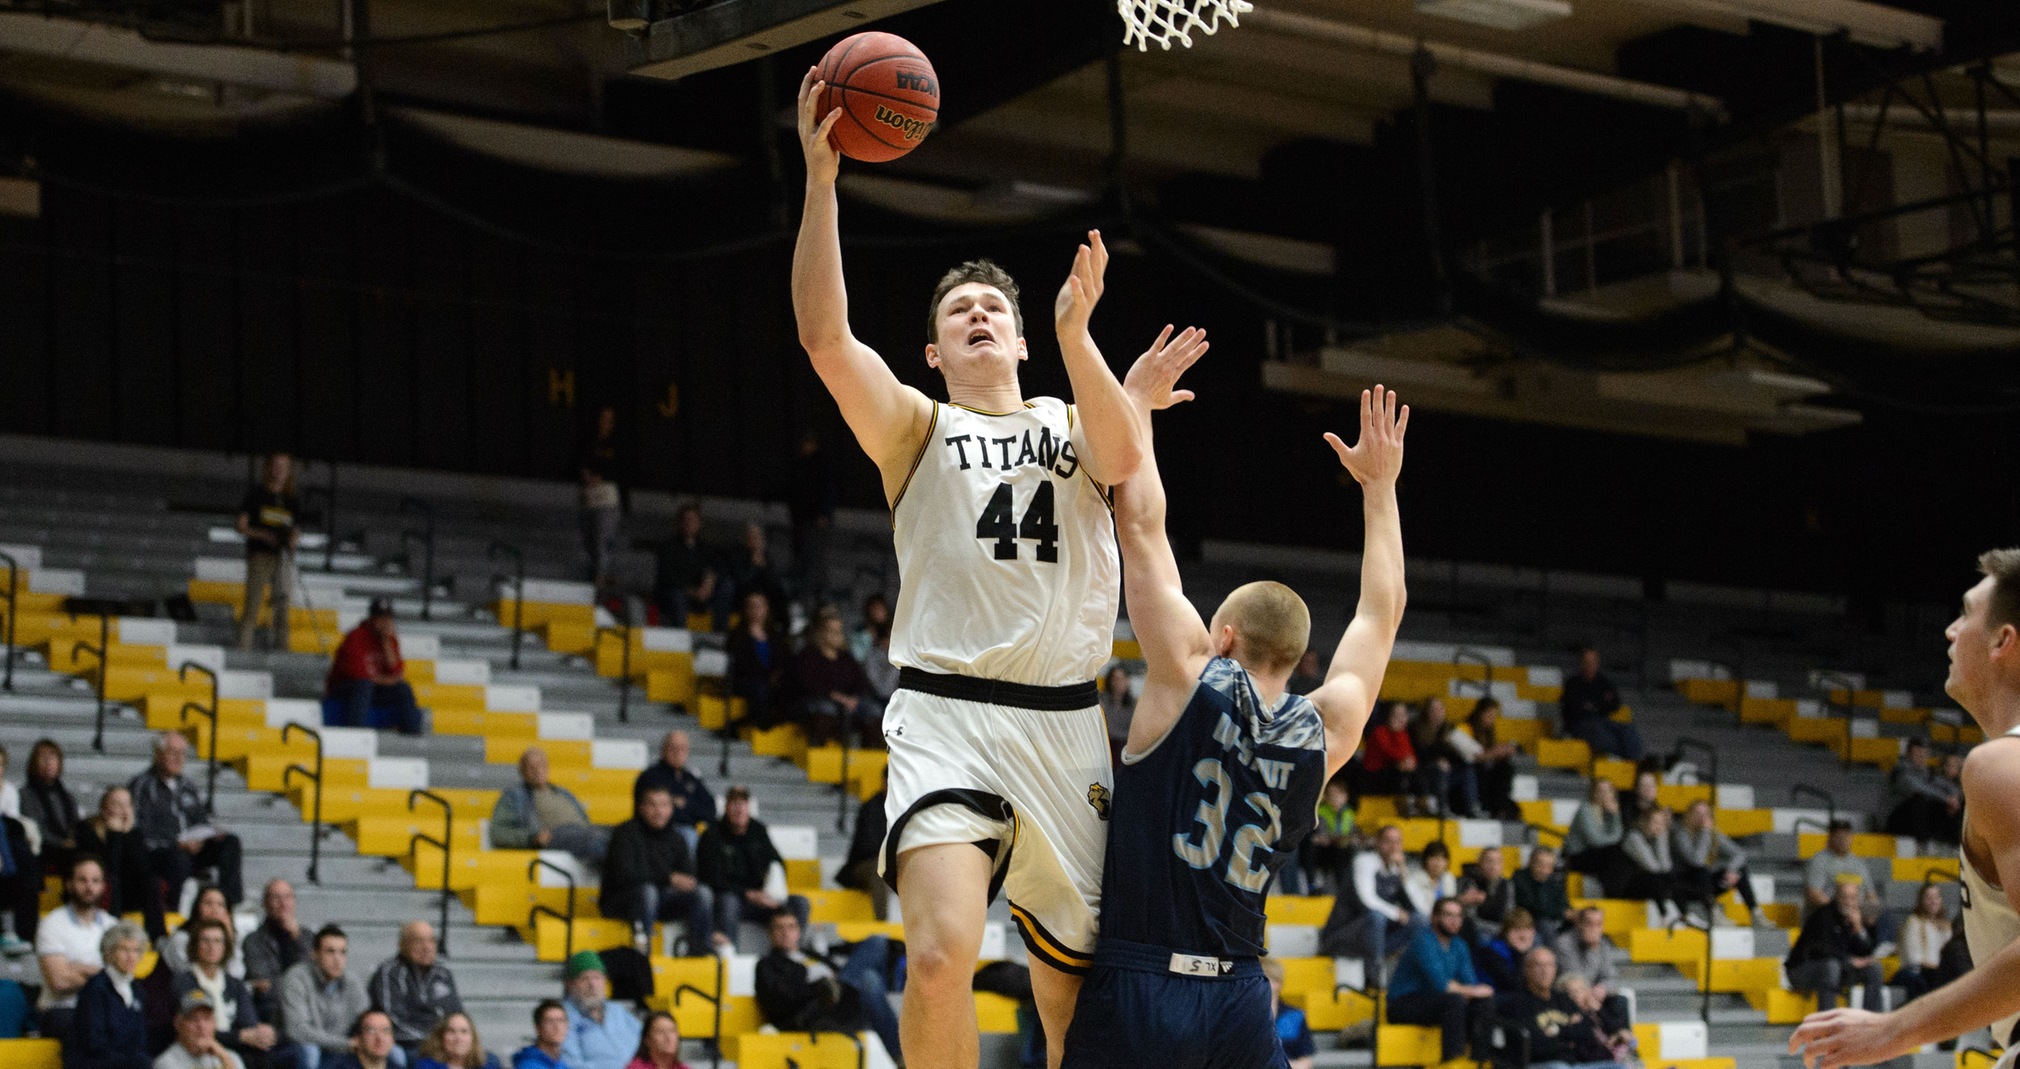 Jack Flynn scored 12 points while totaling eight rebounds, two assists and two blocked shots against the Blugolds.